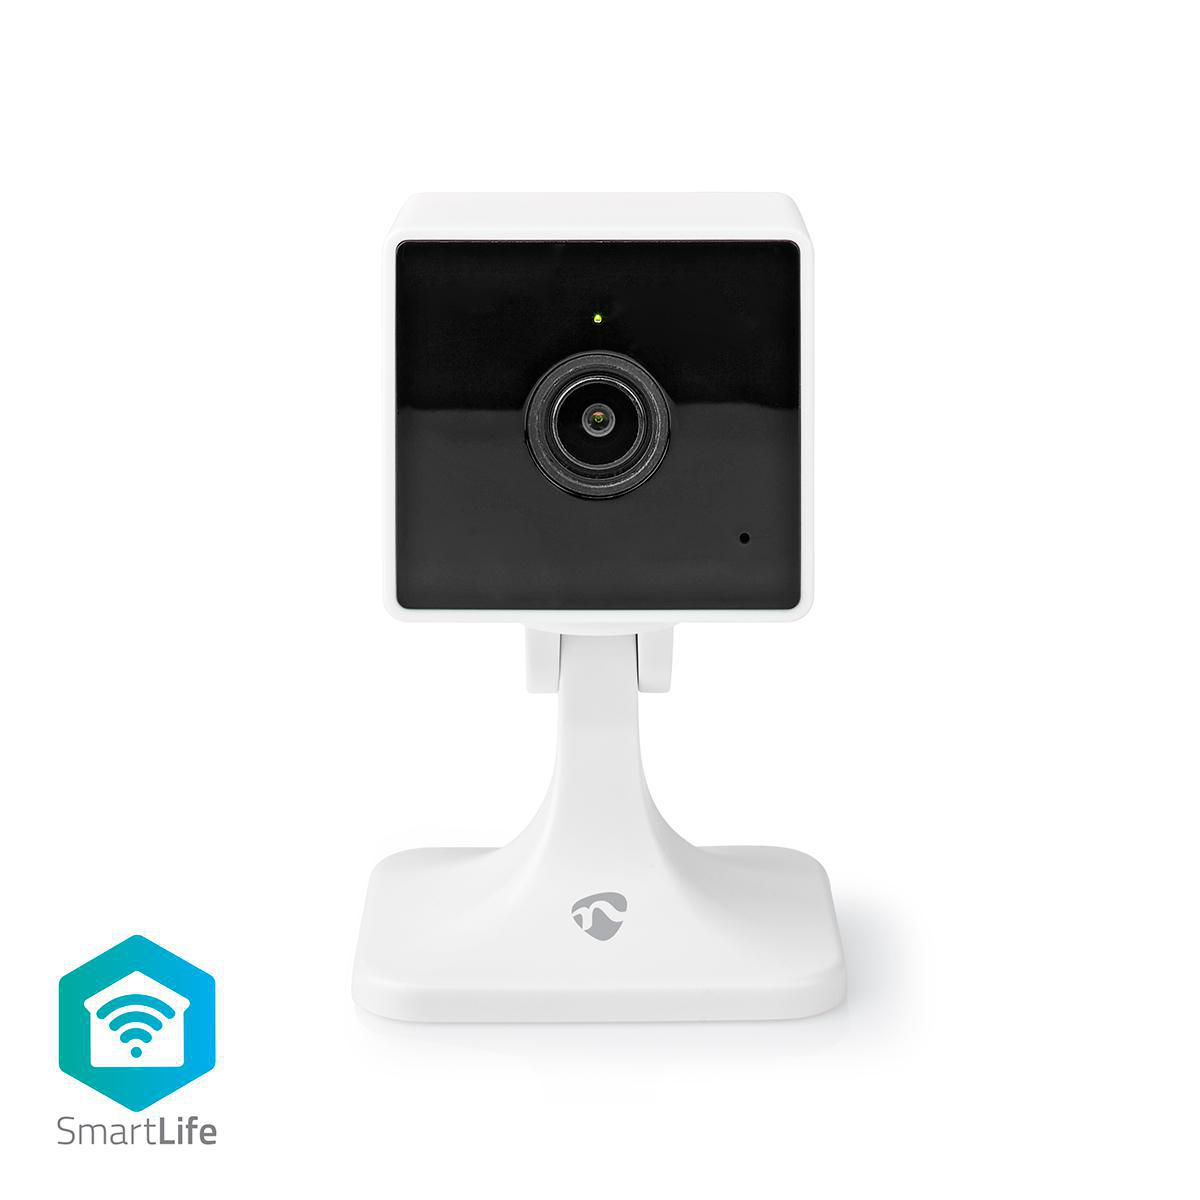 How to install... the SmartLife 'SquareFace' Indoor Camera